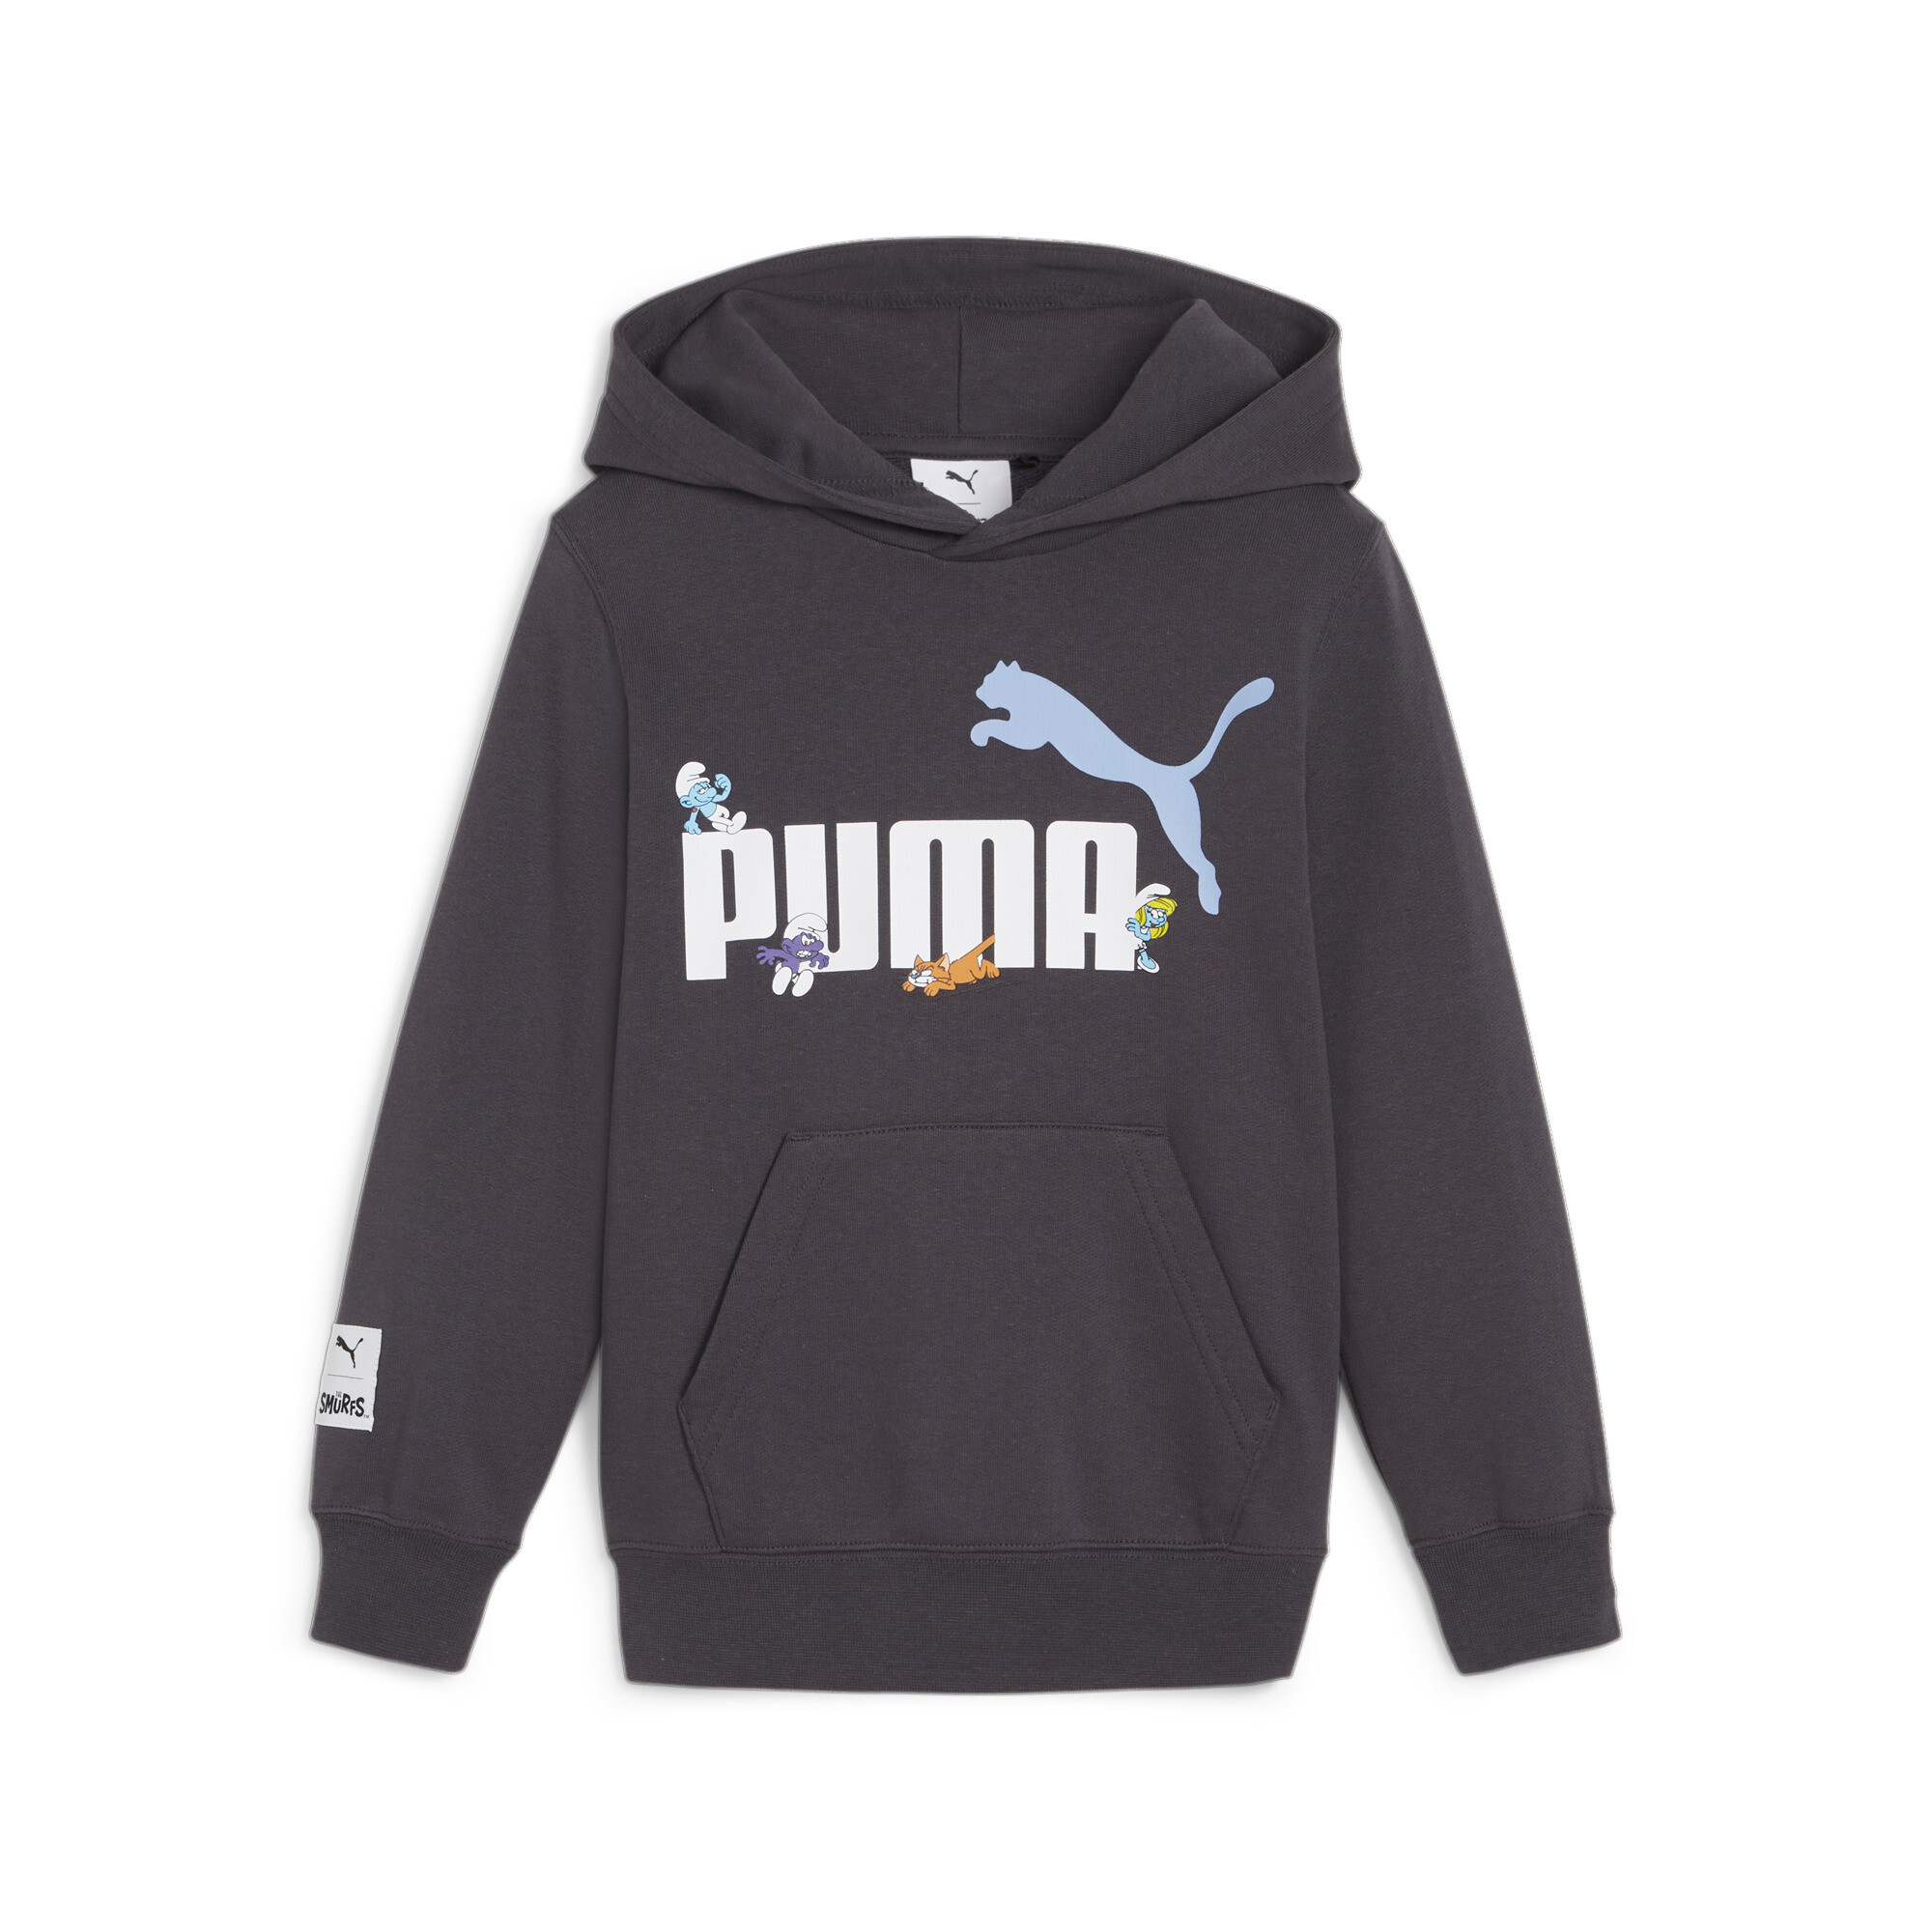 PUMA X THE SMURFS Hoodie In Gray, Size 7-8 Youth